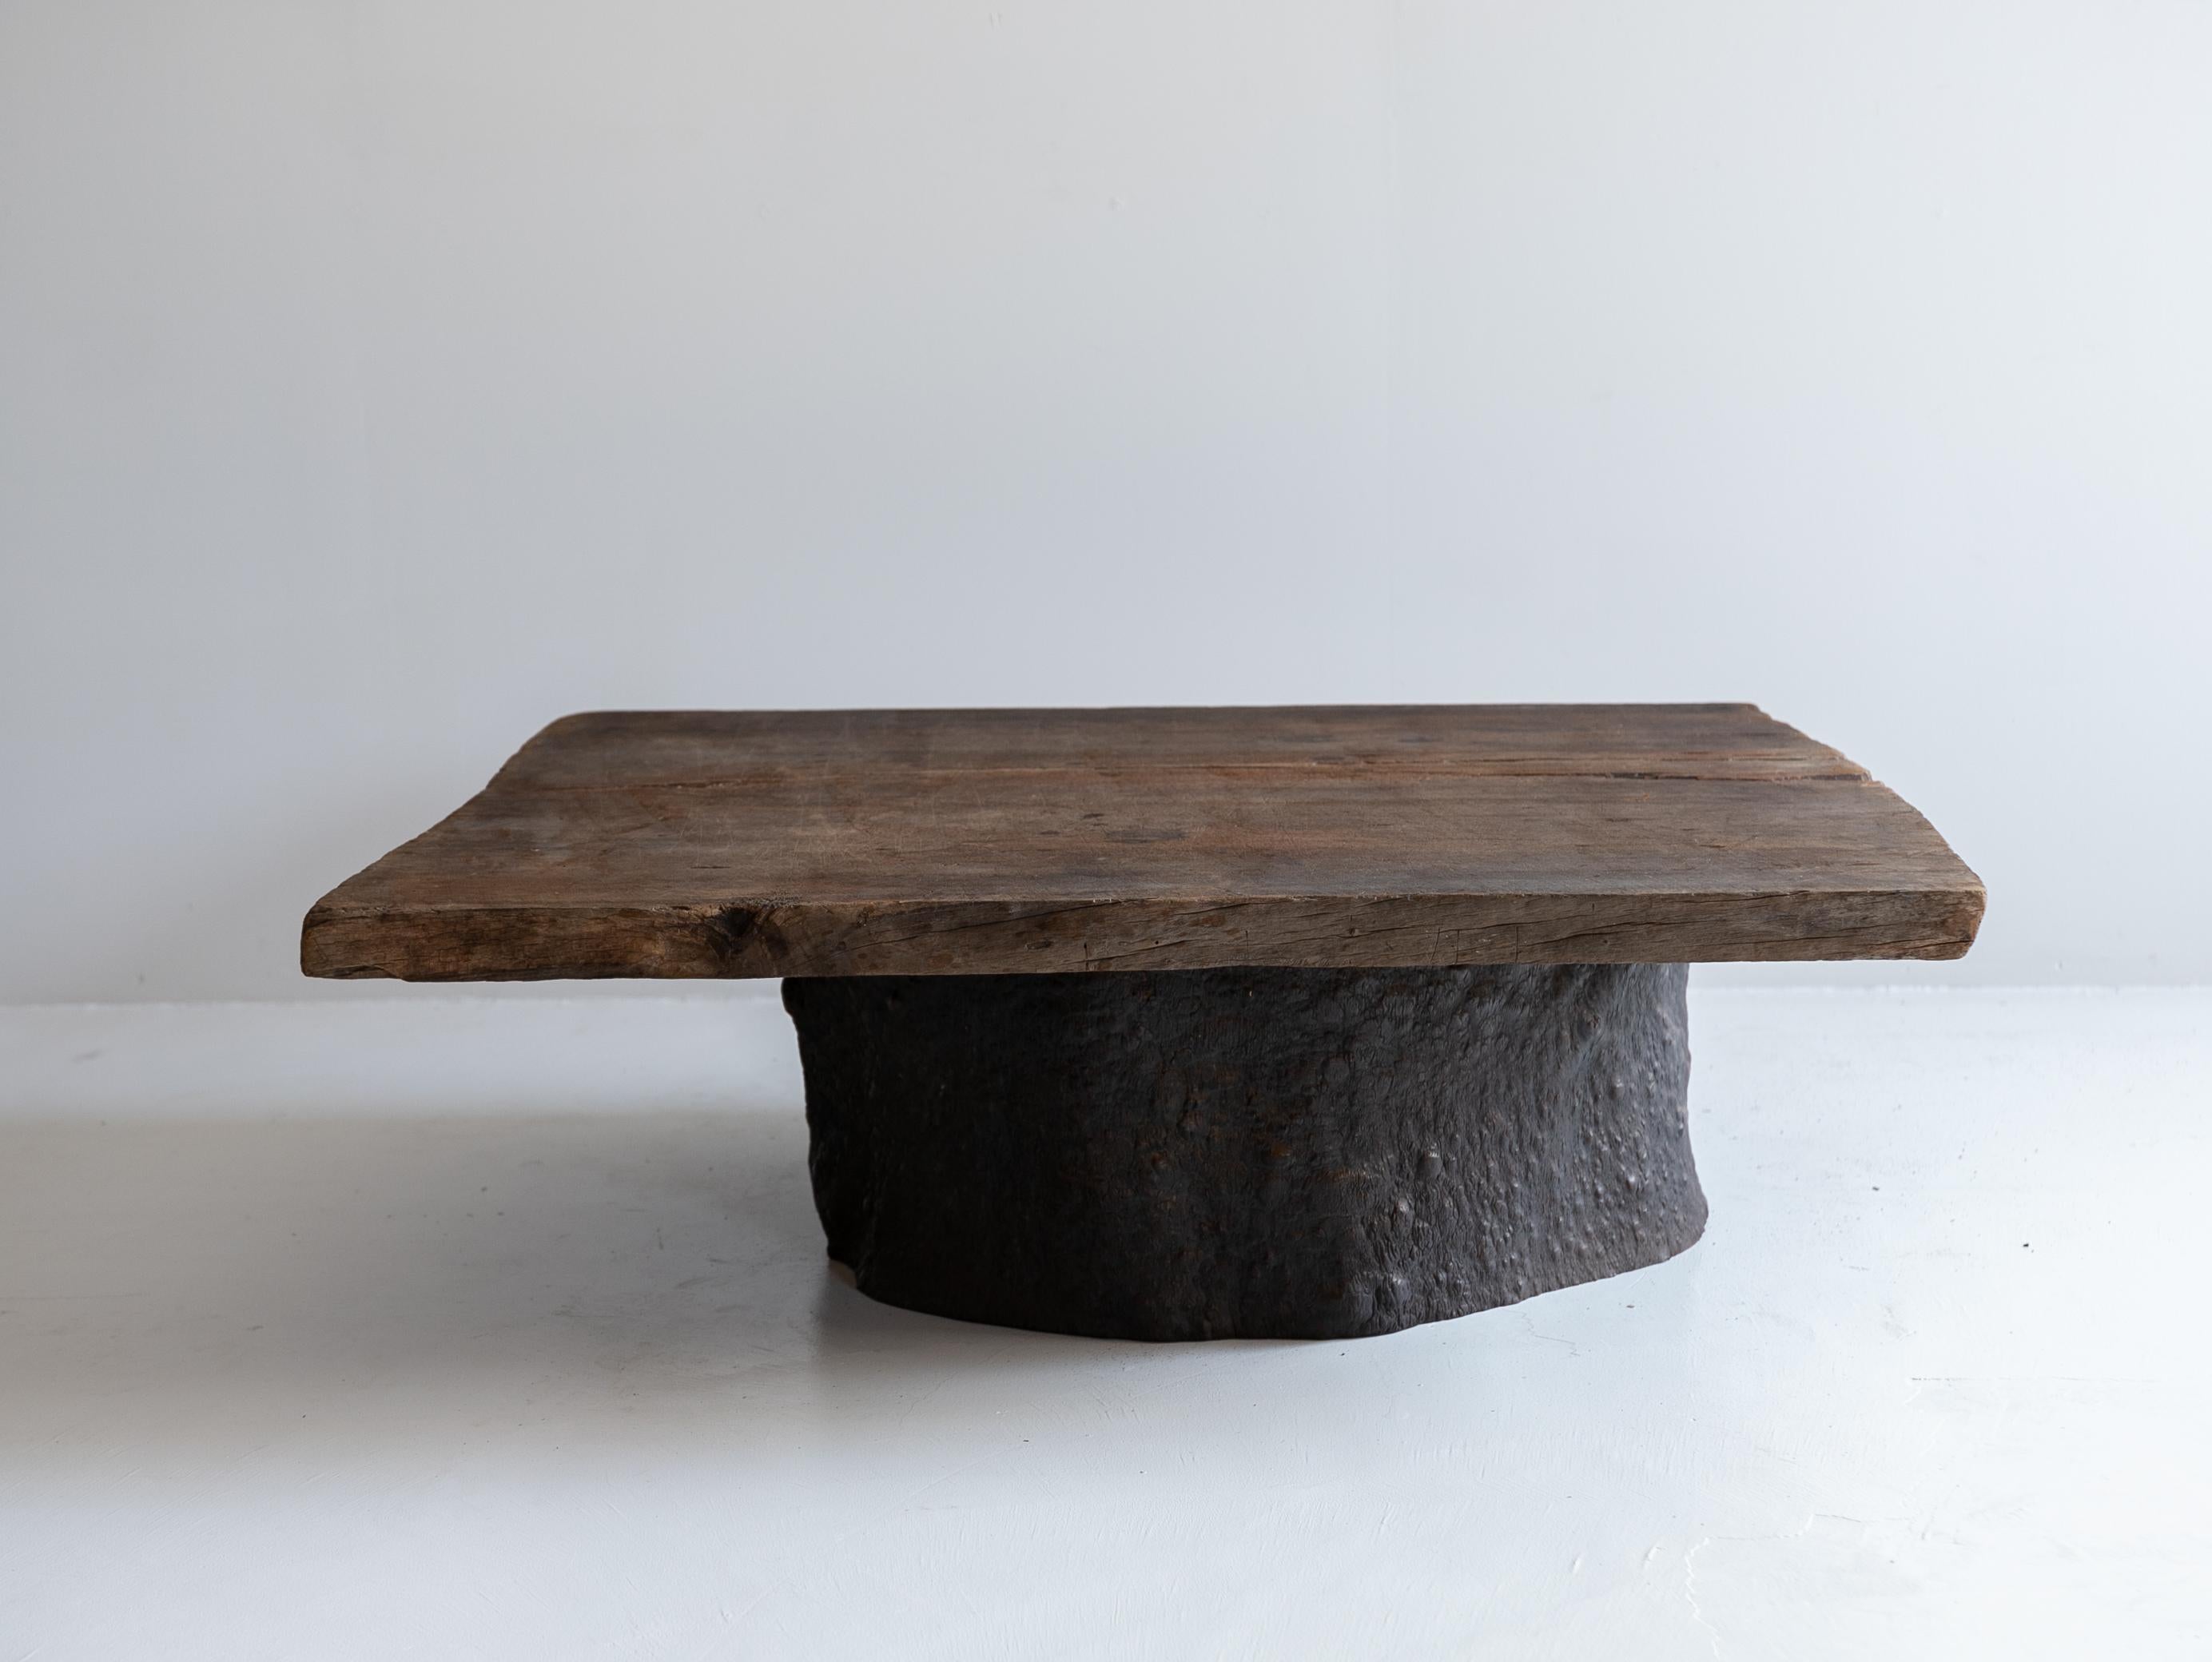 Introducing a lovely low table with a wabi-sabi feel.

This low table is a combination of wooden planks made between the Meiji and Taisho periods.
The base part is made from a brazier used in the Meiji and Taisho periods.

The top plate was used by